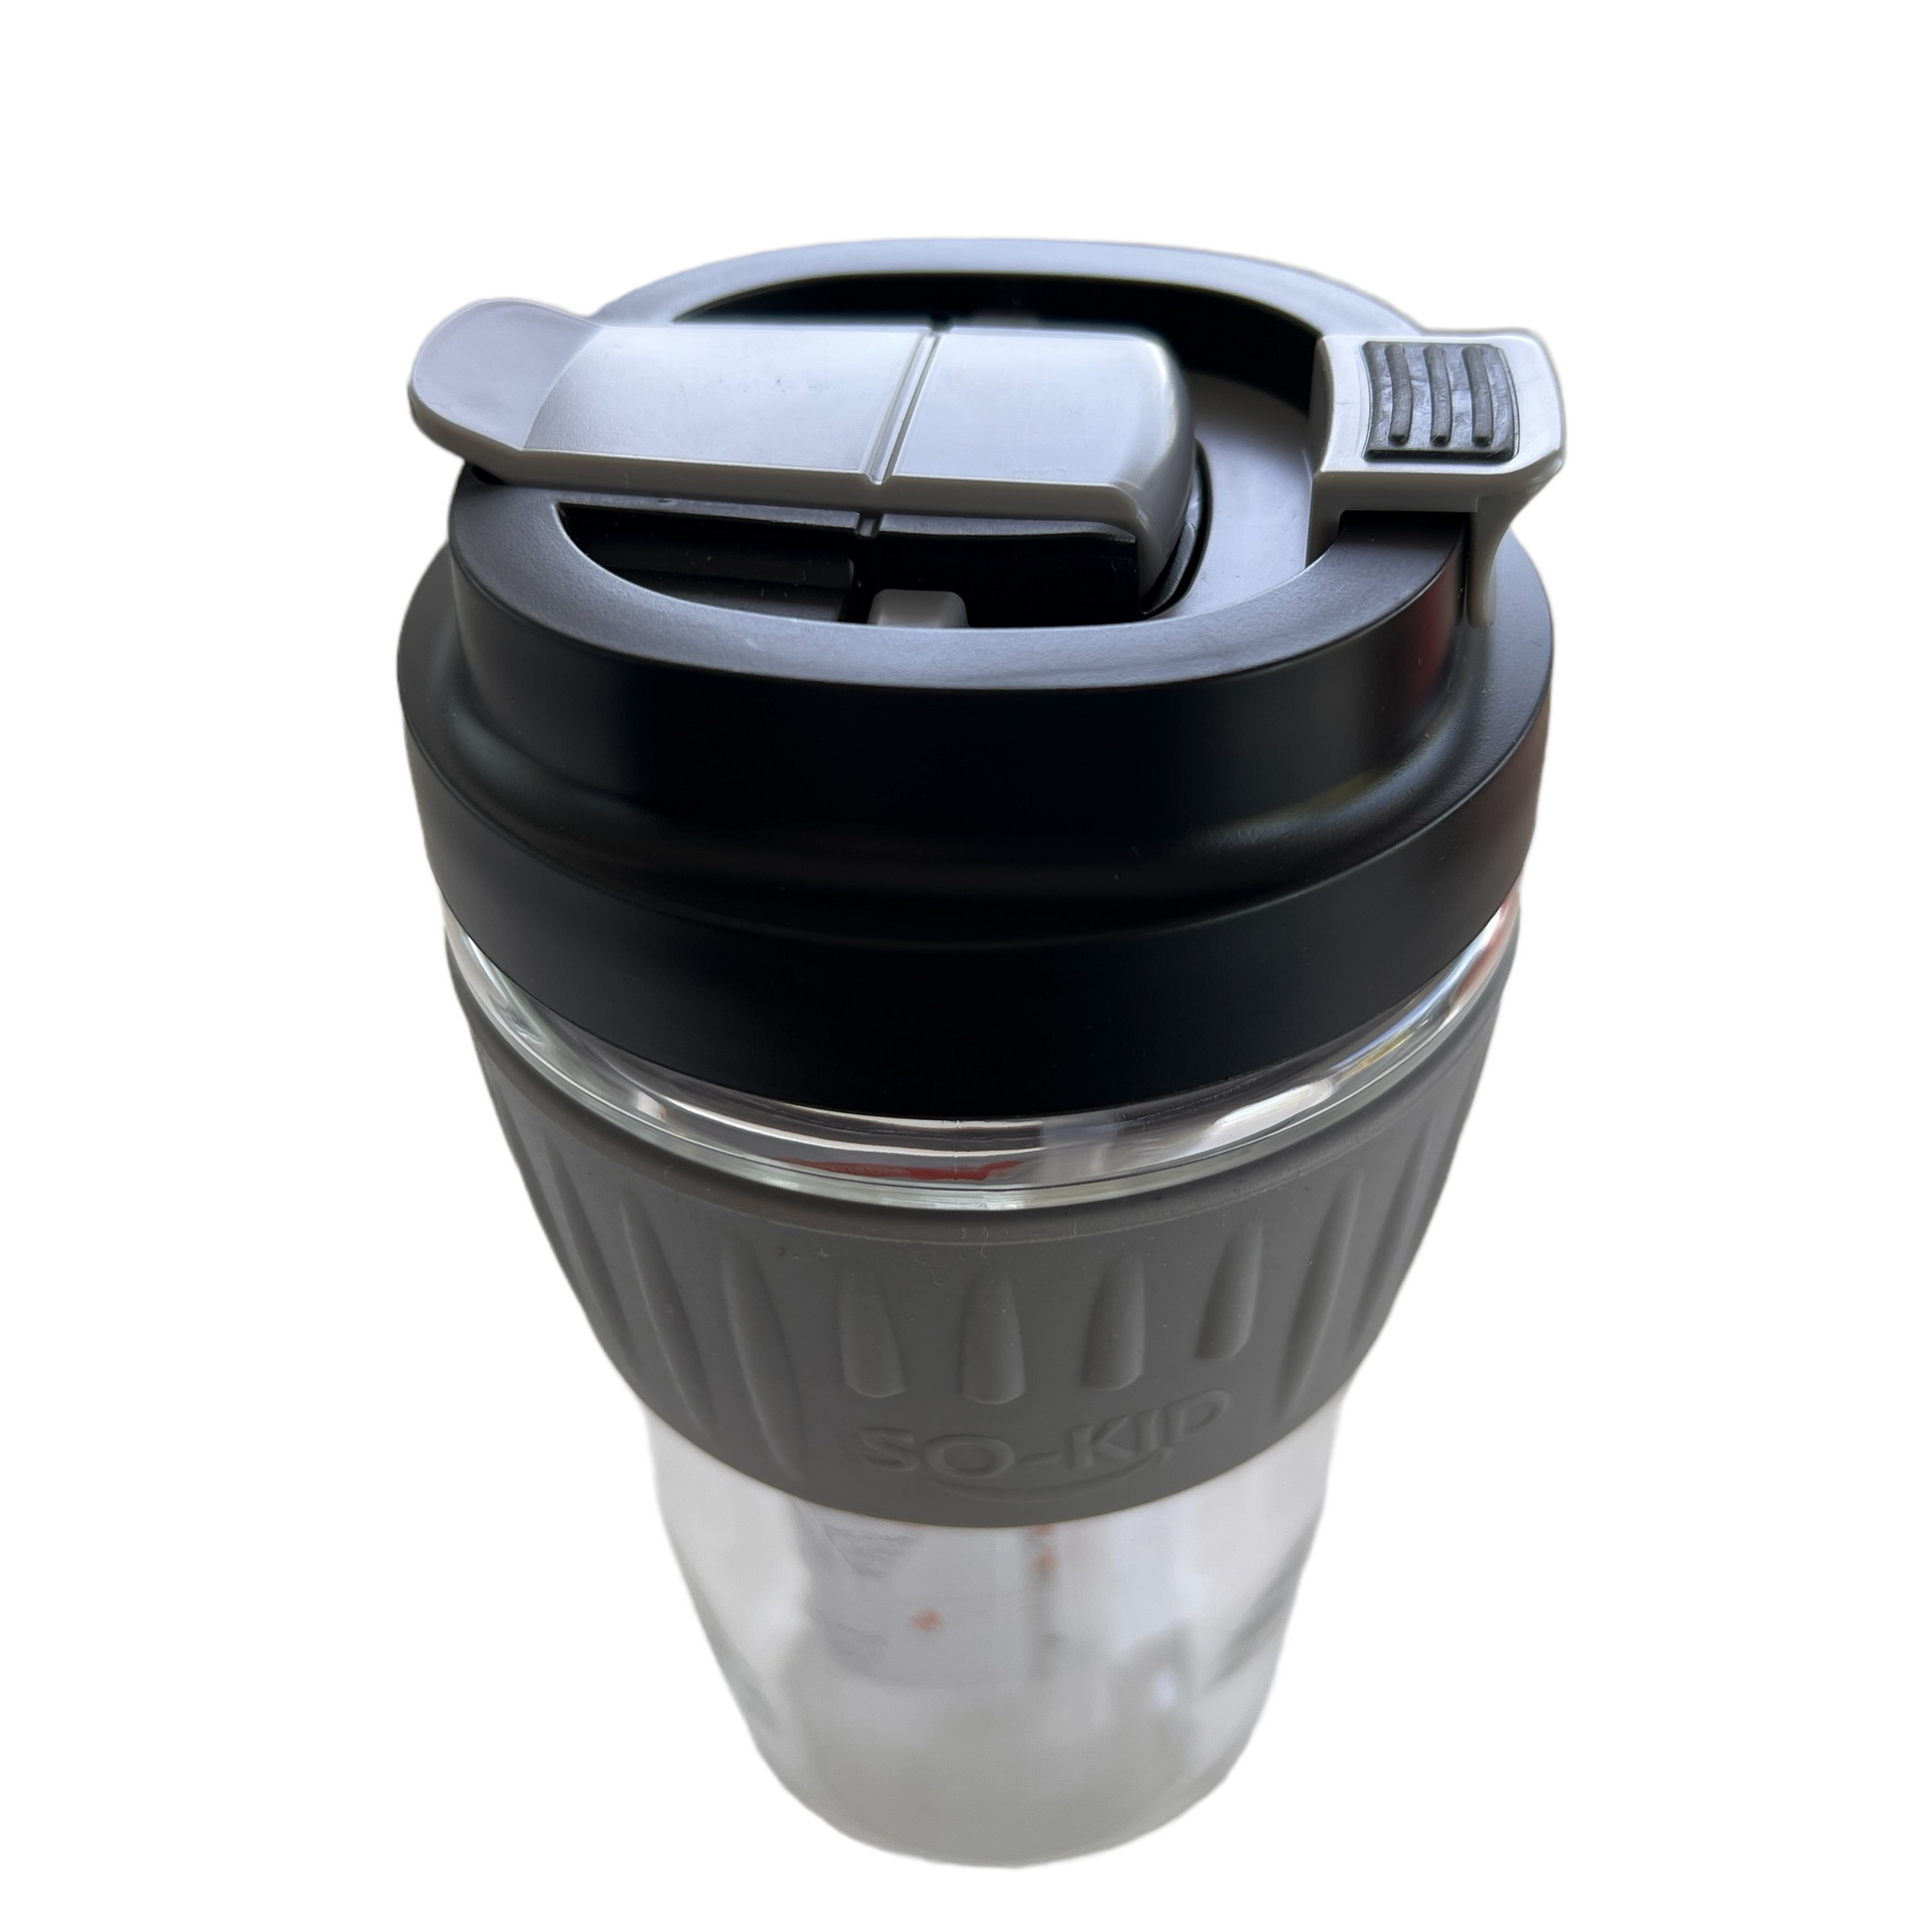 Heavy duty glass mug with lid and built in straw Mobility & Accessibility SPIRIT SPARKPLUGS Black 400ml 